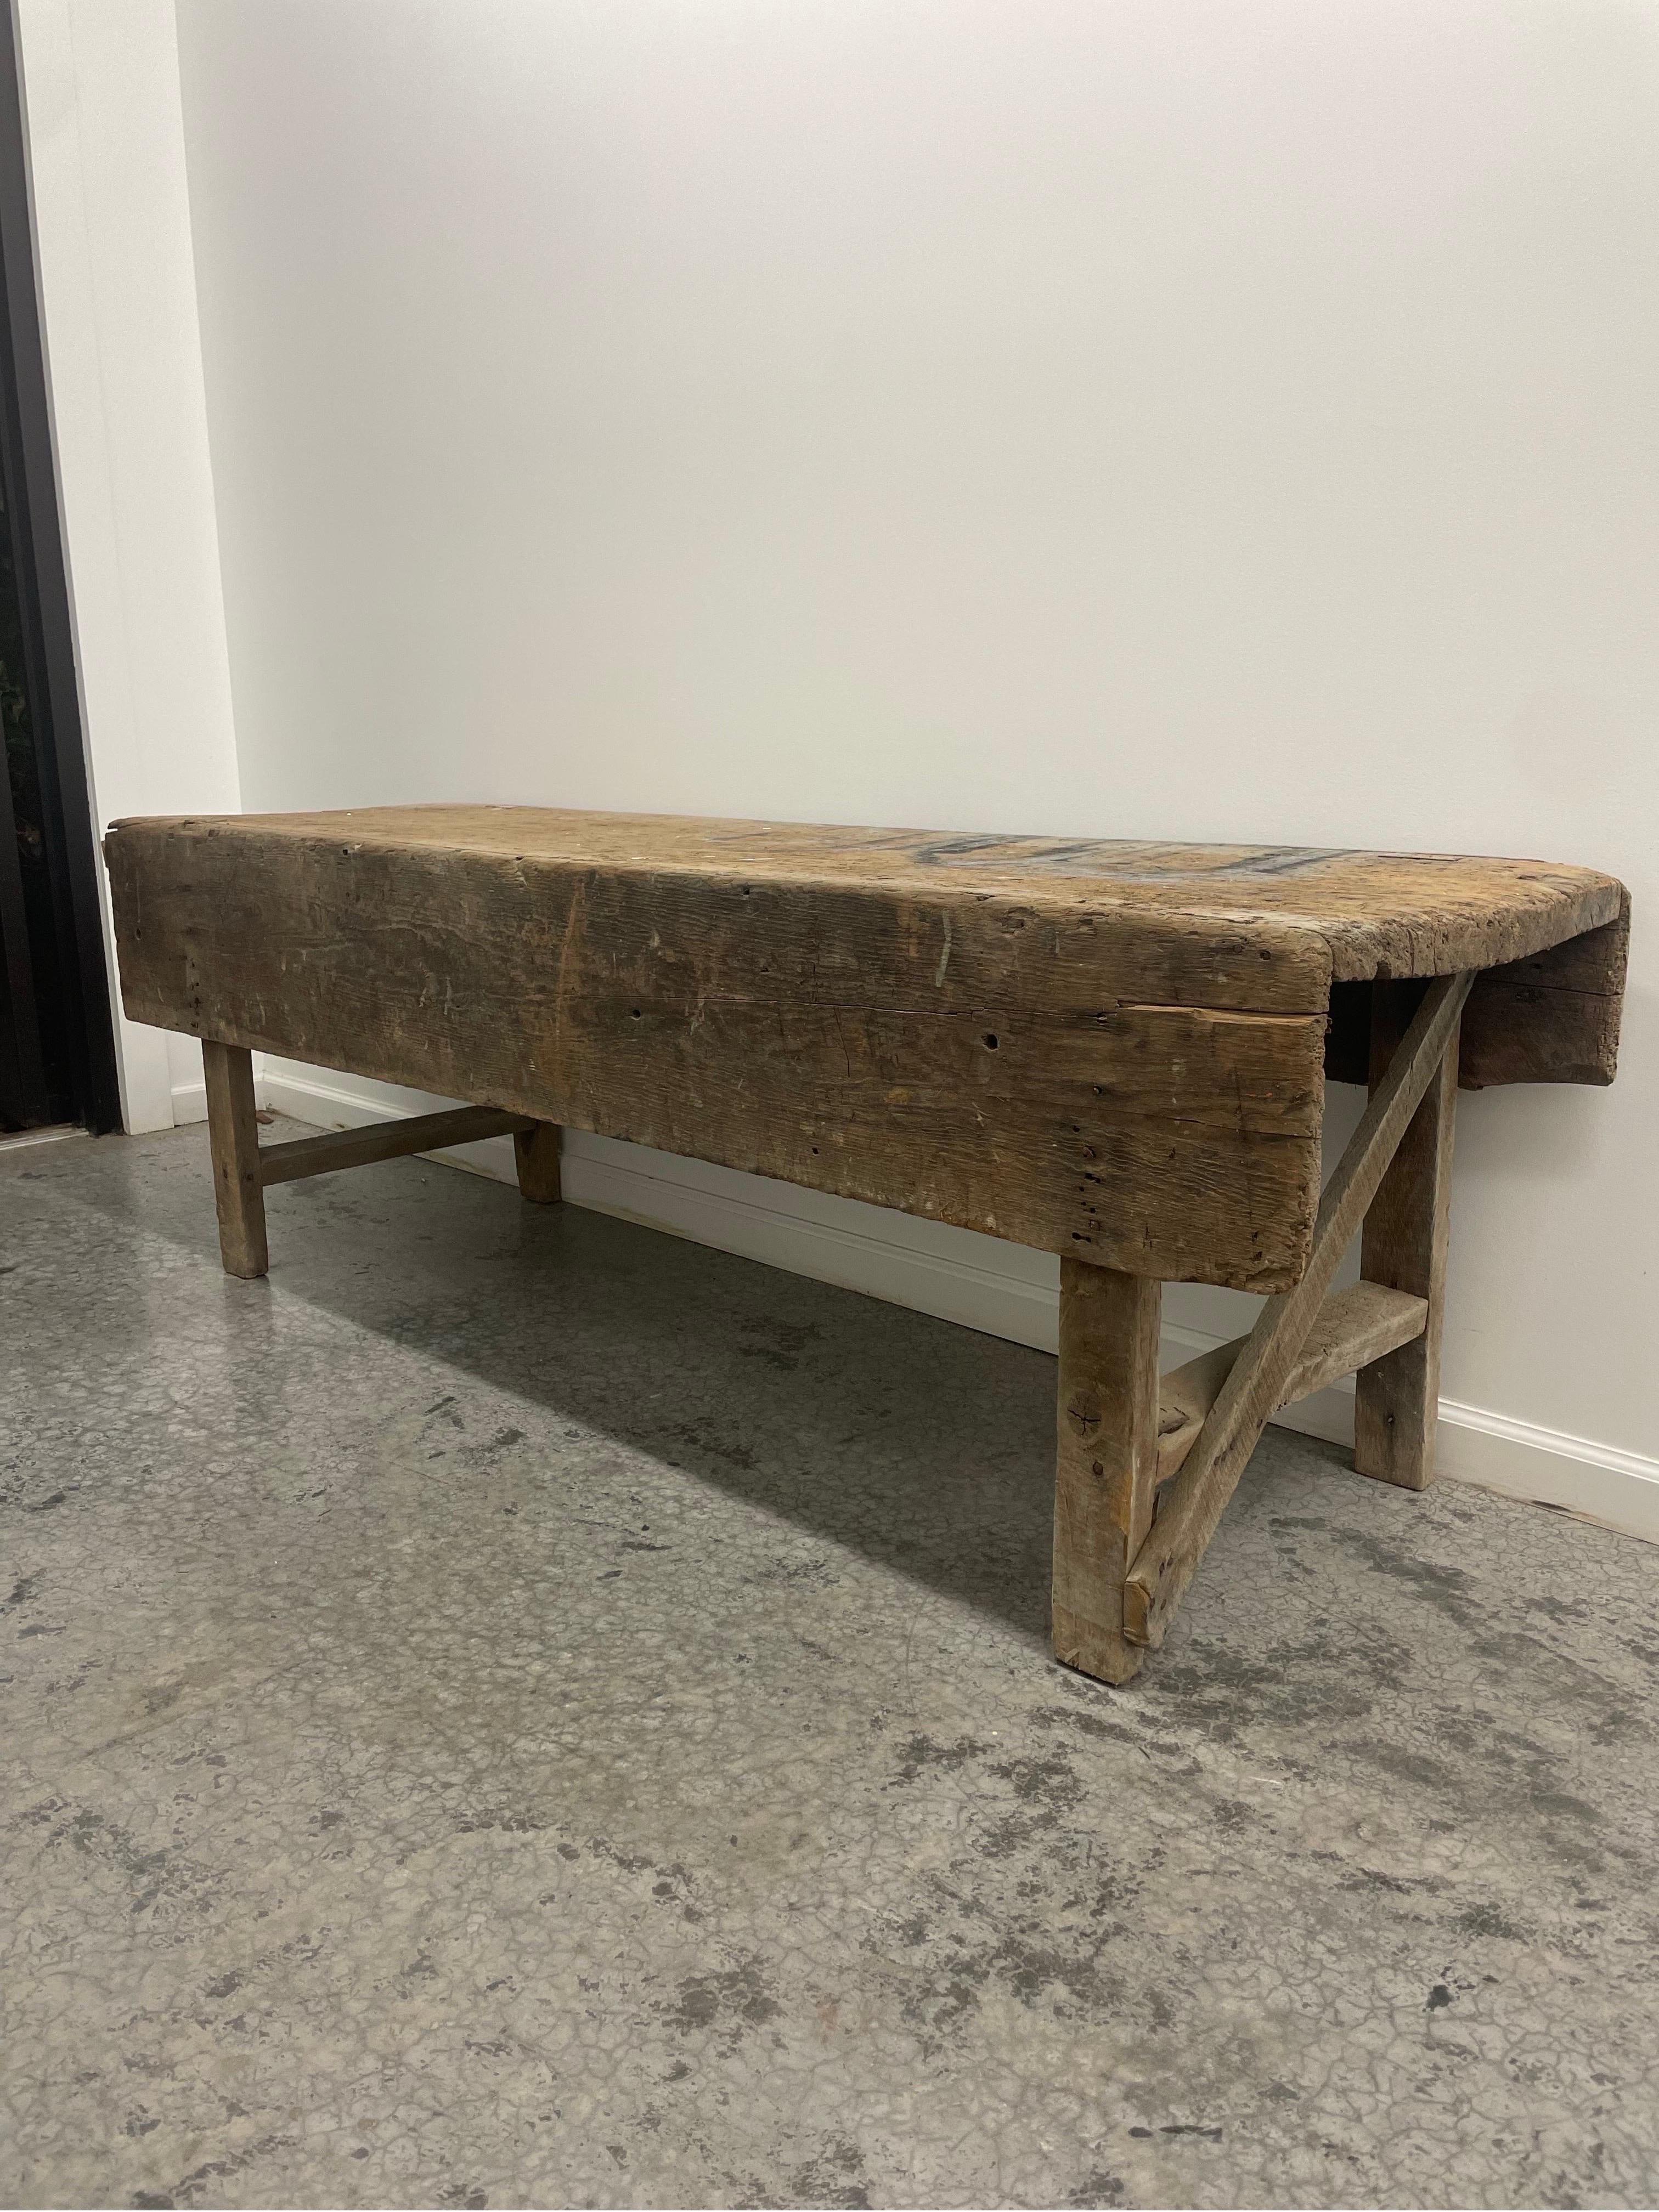 Primitive mortuary Table Industrial Workbench Brutalist In Distressed Condition For Sale In Cookeville, TN